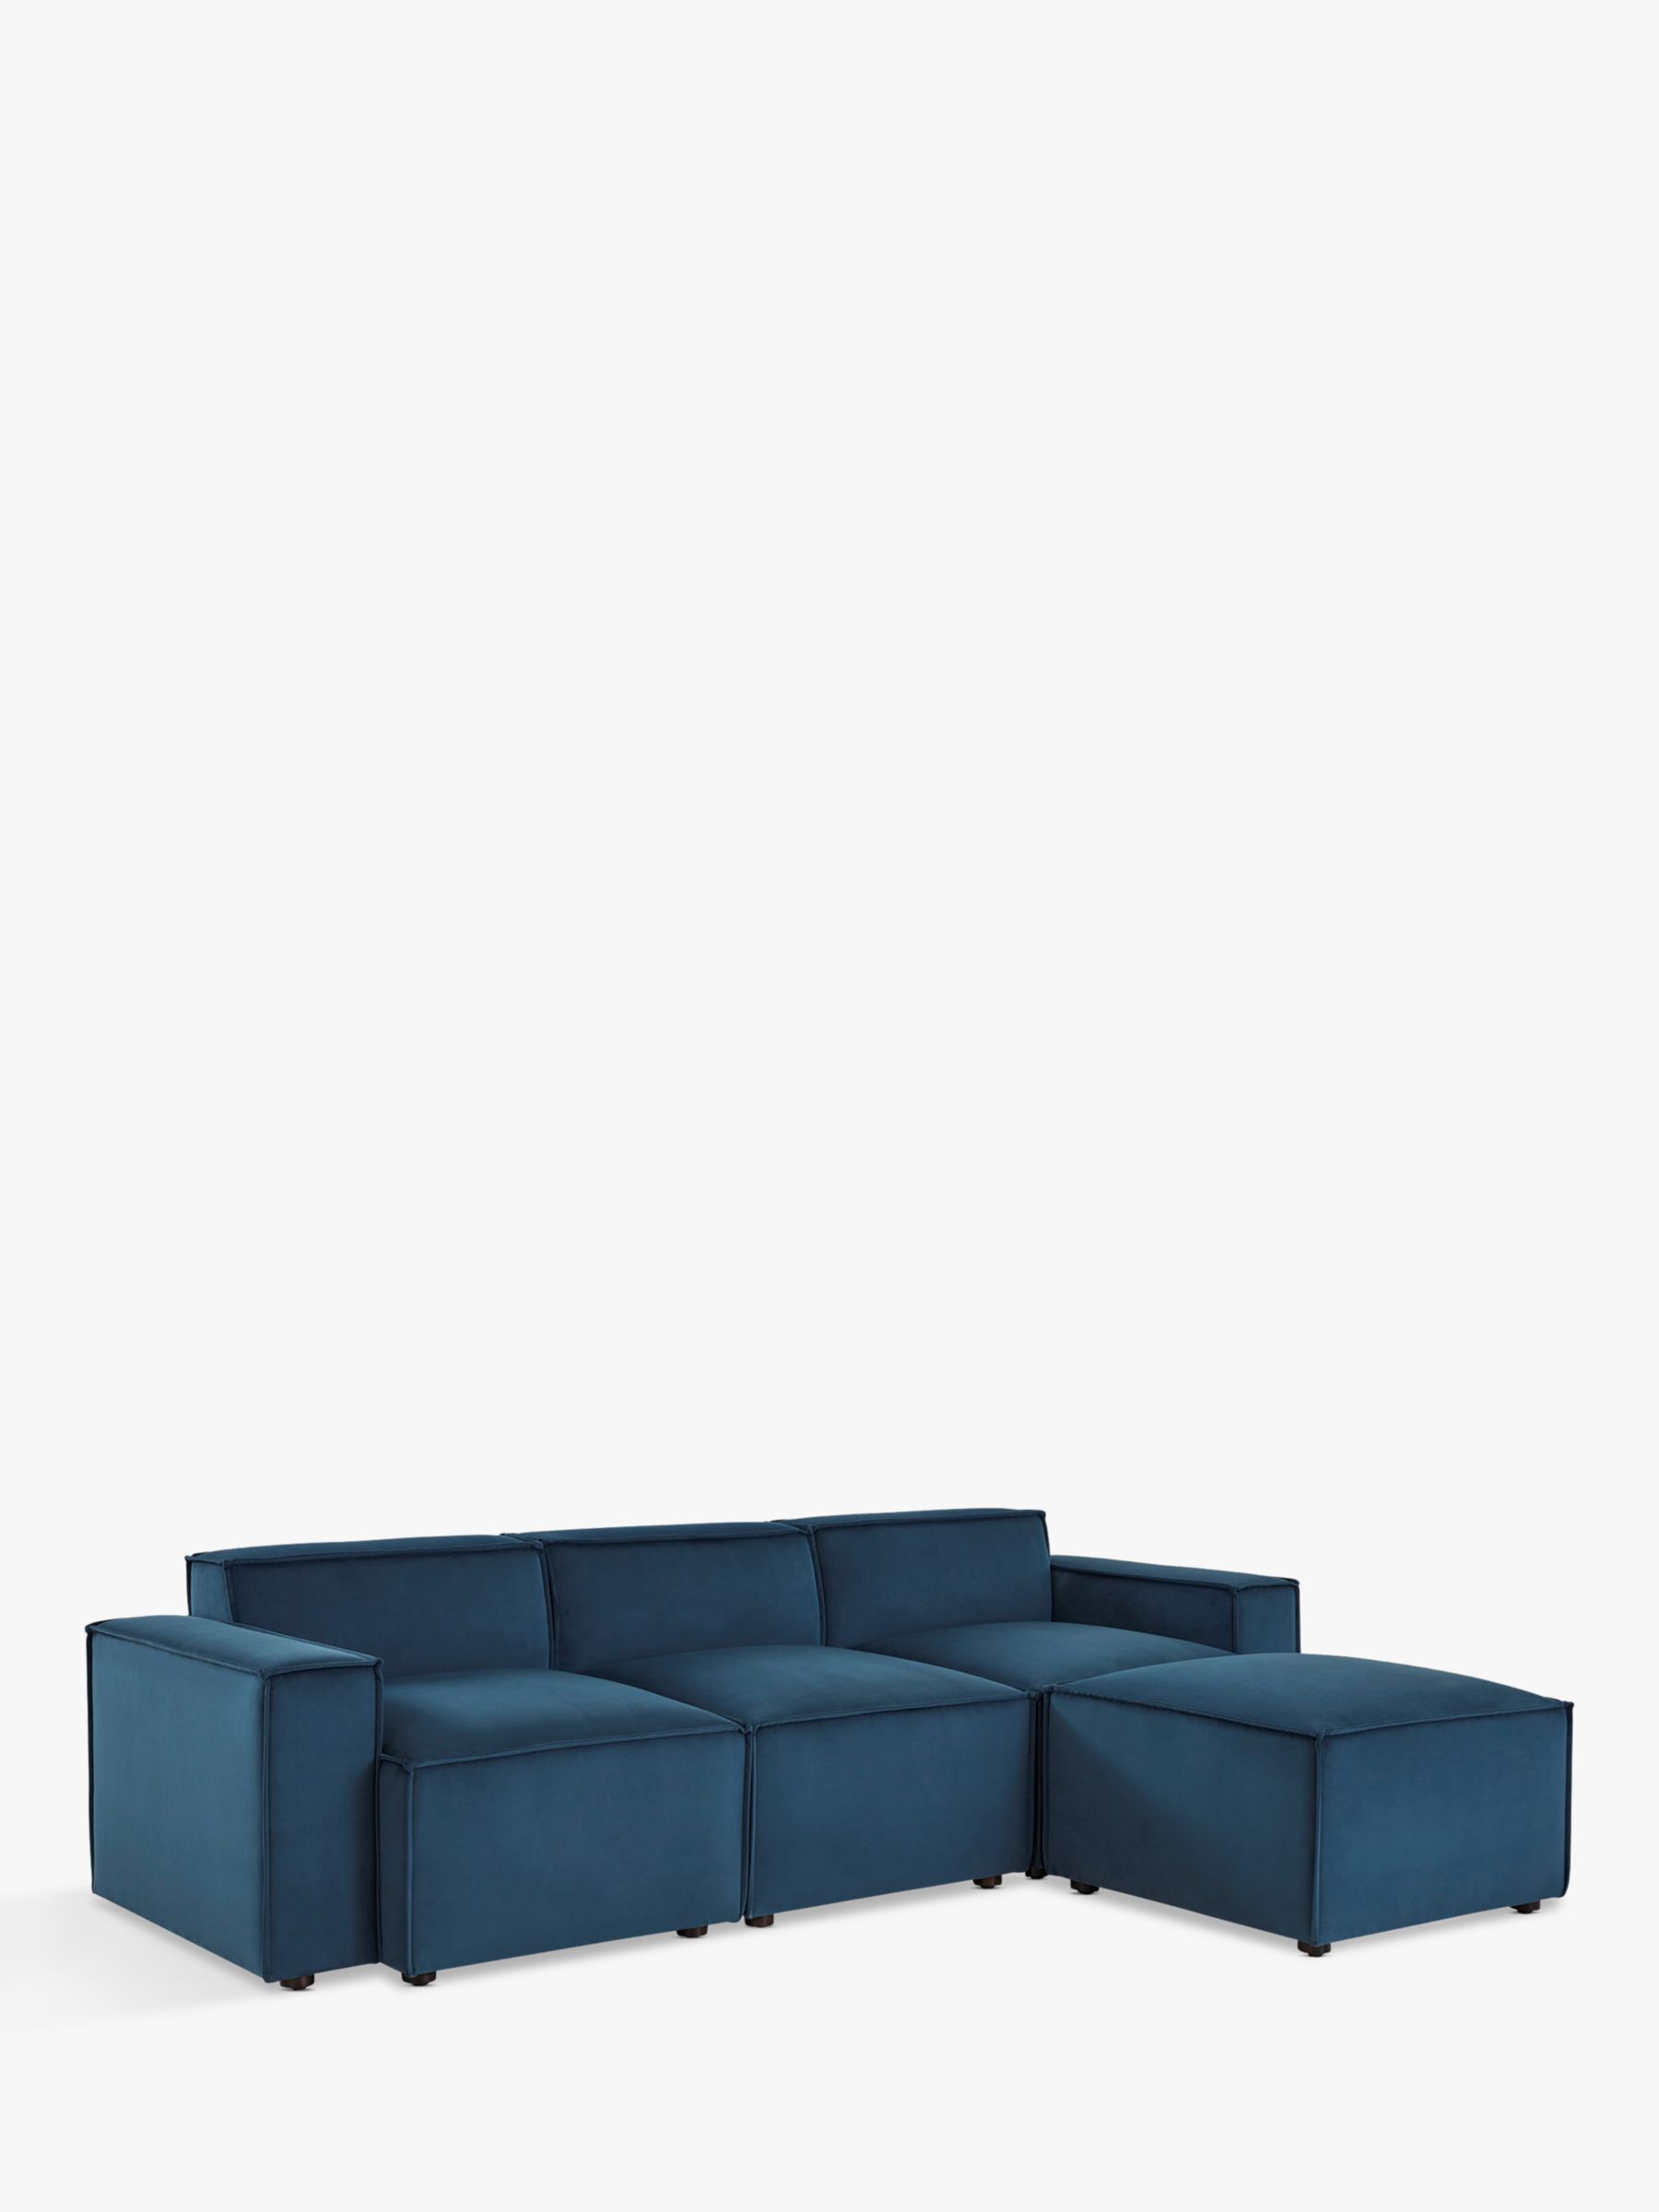 Photo of Swyft model 03 large 3 seater sofa with ottoman